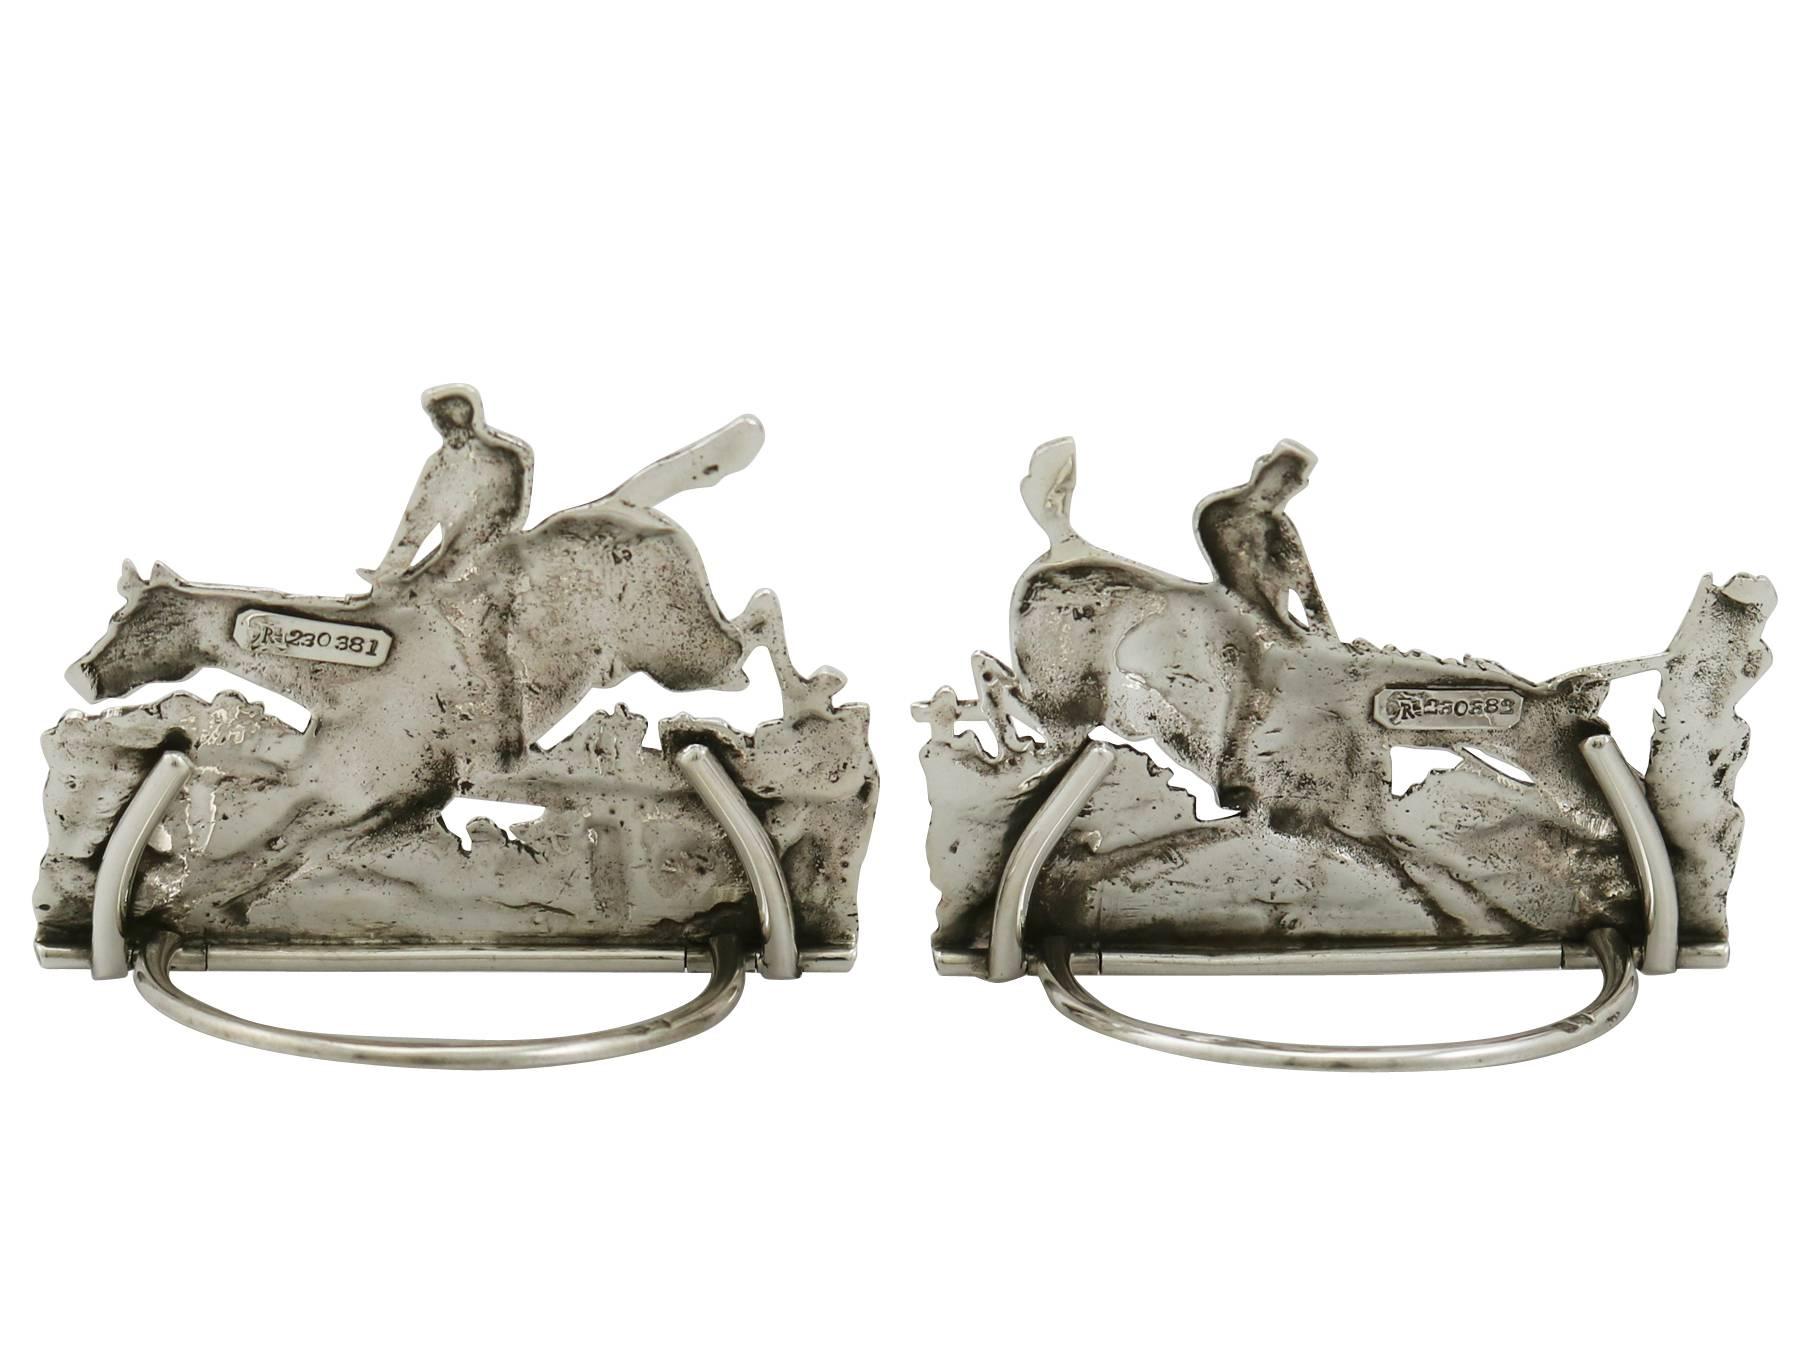 An exceptional, fine and impressive pair of antique Victorian English cast sterling silver card/menu holders; an addition to animal related silverware collection.

These exceptional Victorian cast sterling silver menu holders have been